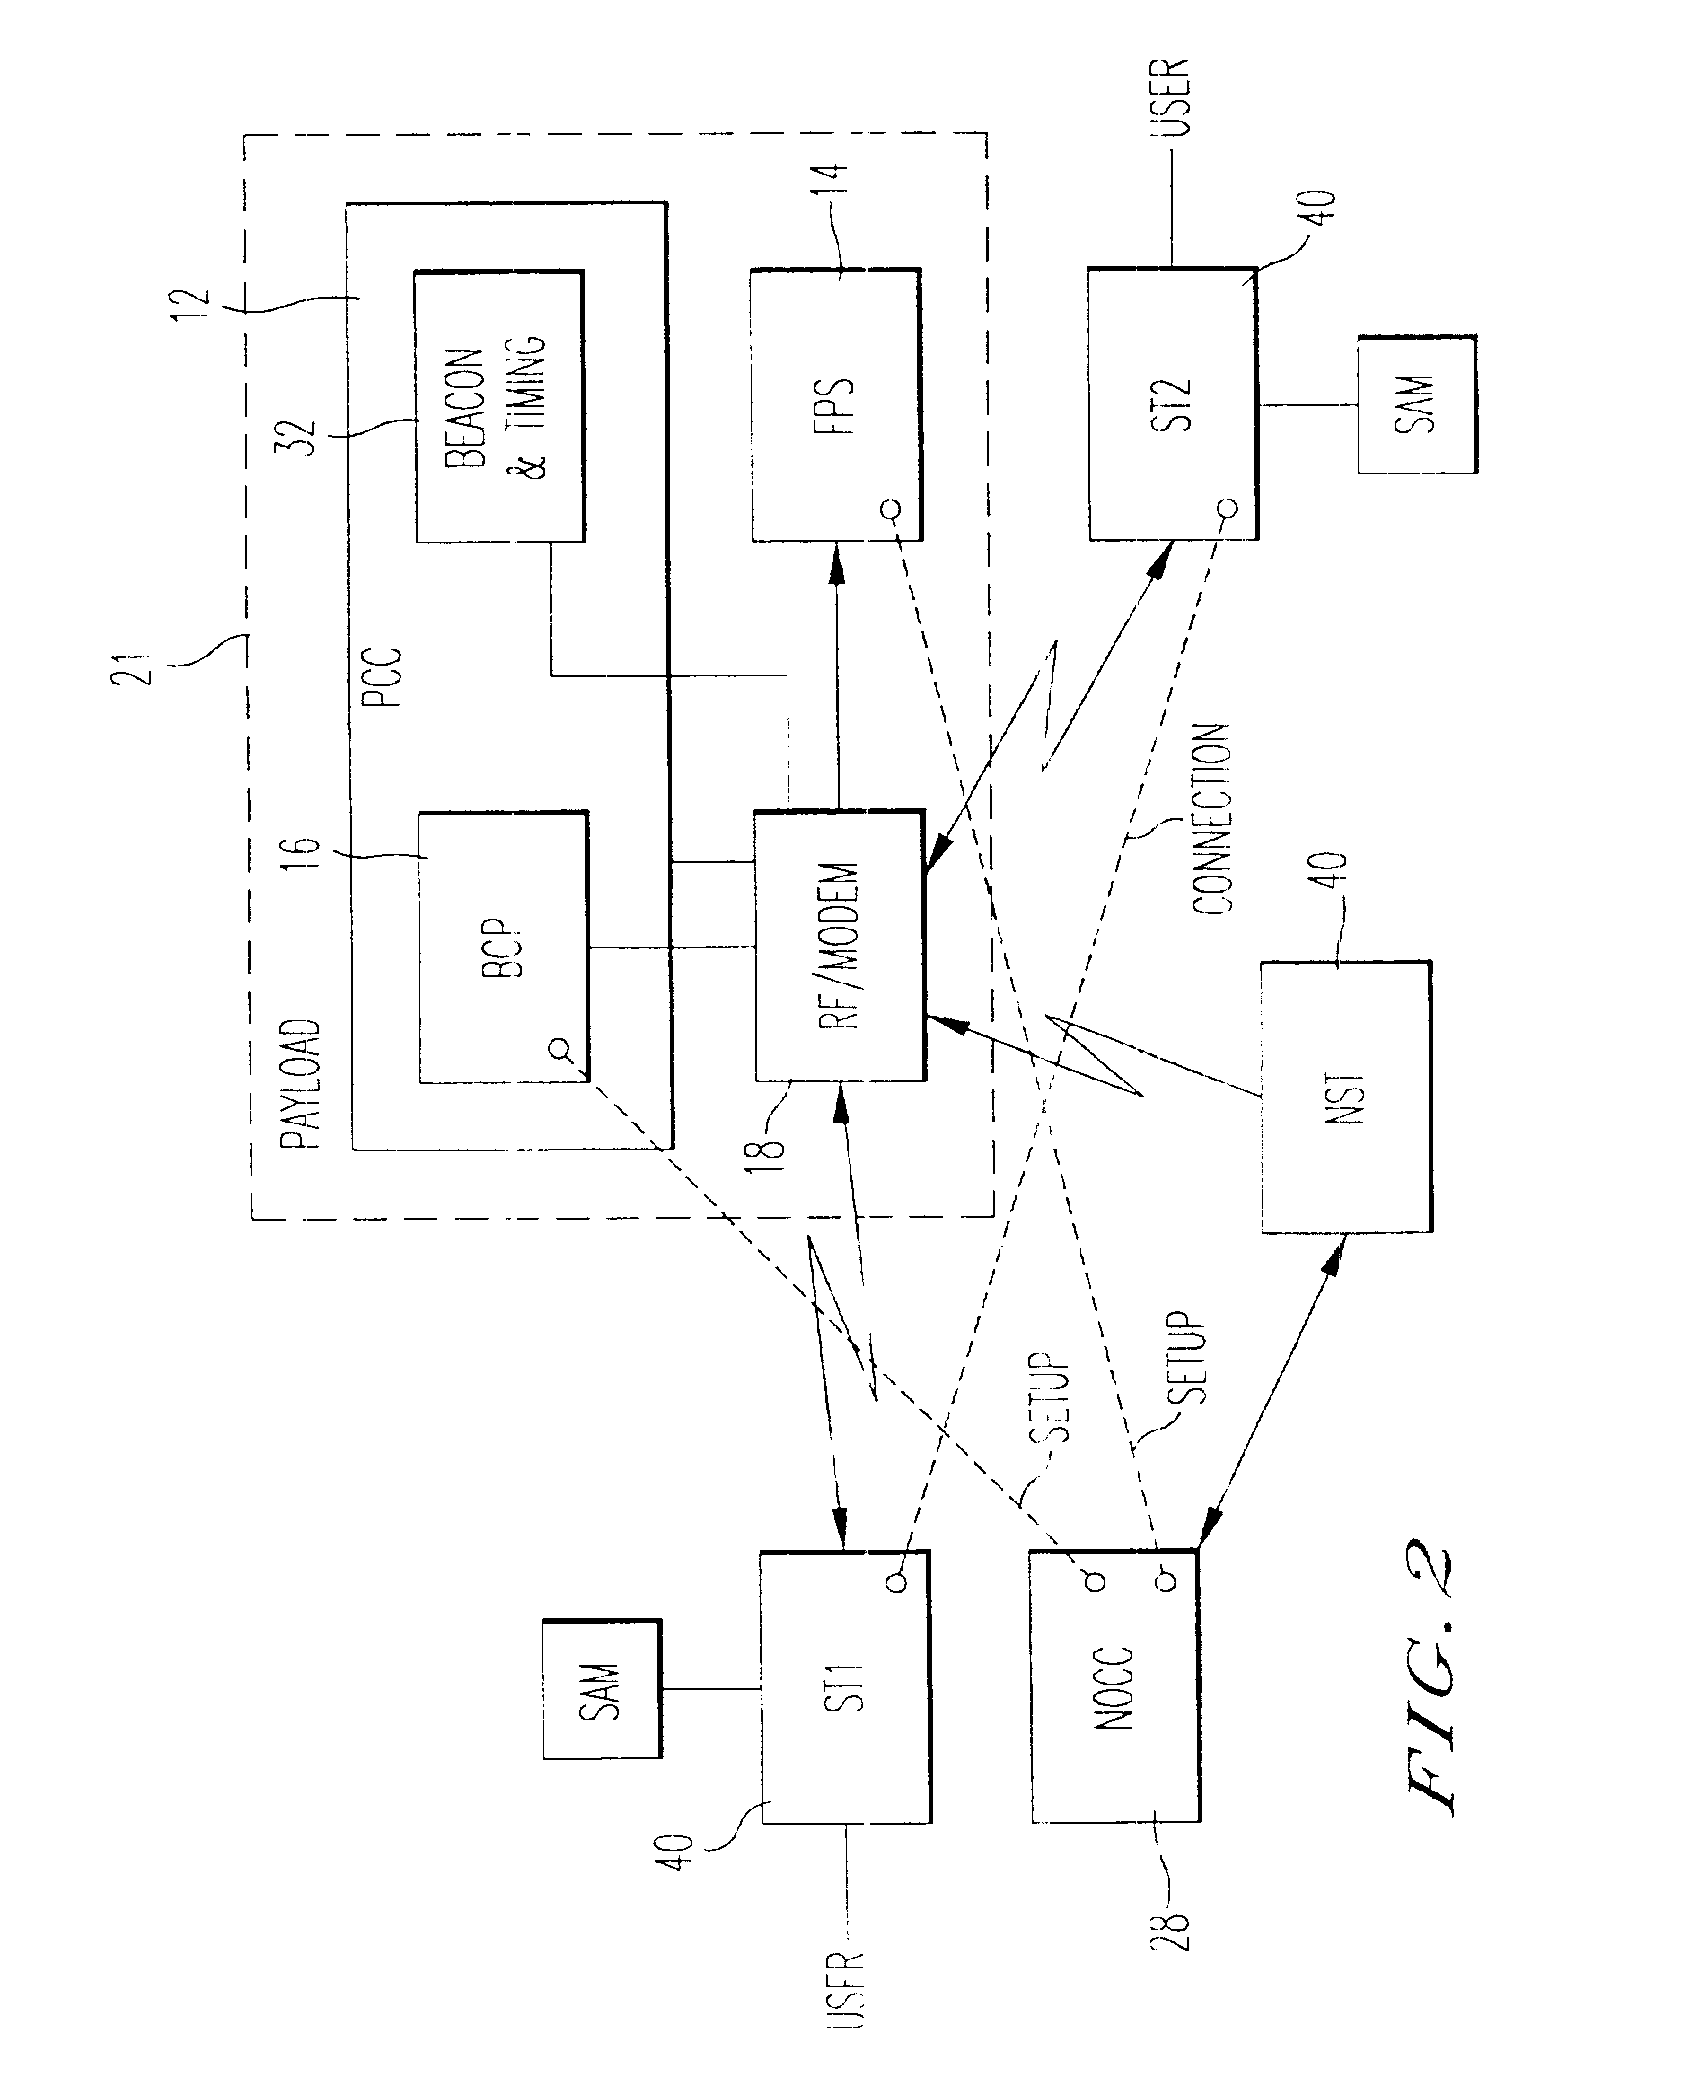 System for providing satellite bandwidth on demand employing uplink frame formatting for smoothing and mitigating jitter and dynamically changing numbers of contention and data channels